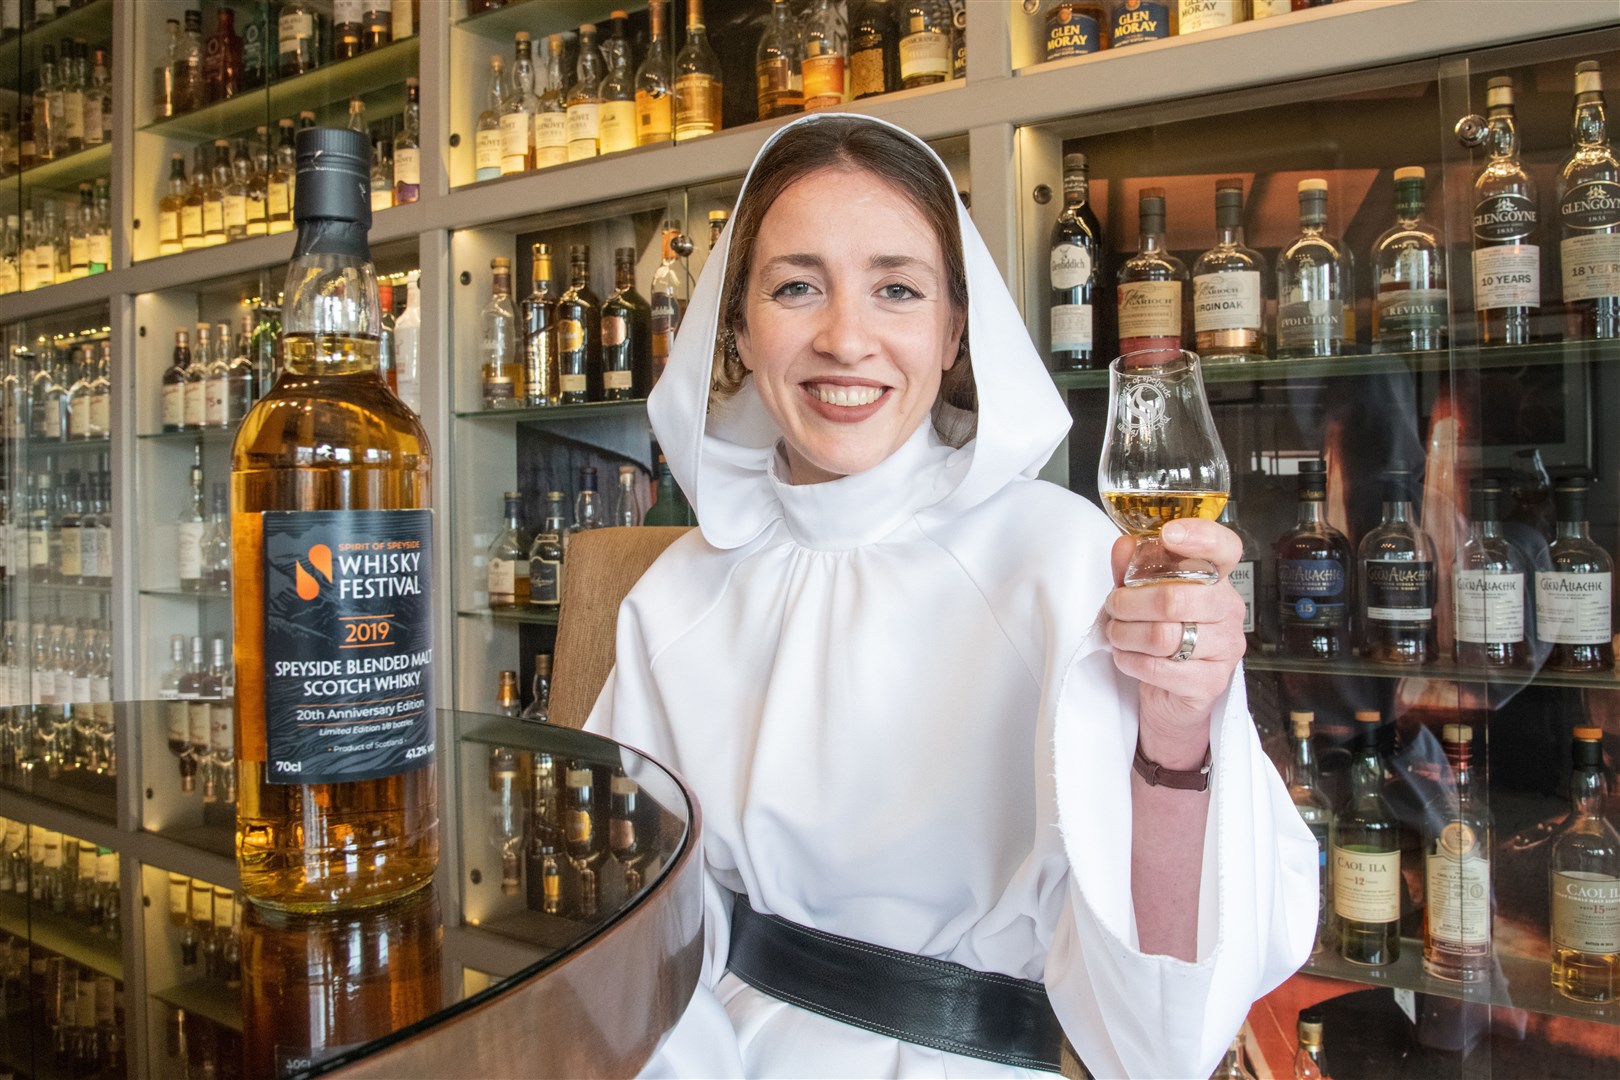 Steph Murray from the Dowans Hotel in Aberlour pays homage to Princess Leia from Star Wars with a dram. Picture: Daniel Forsyth